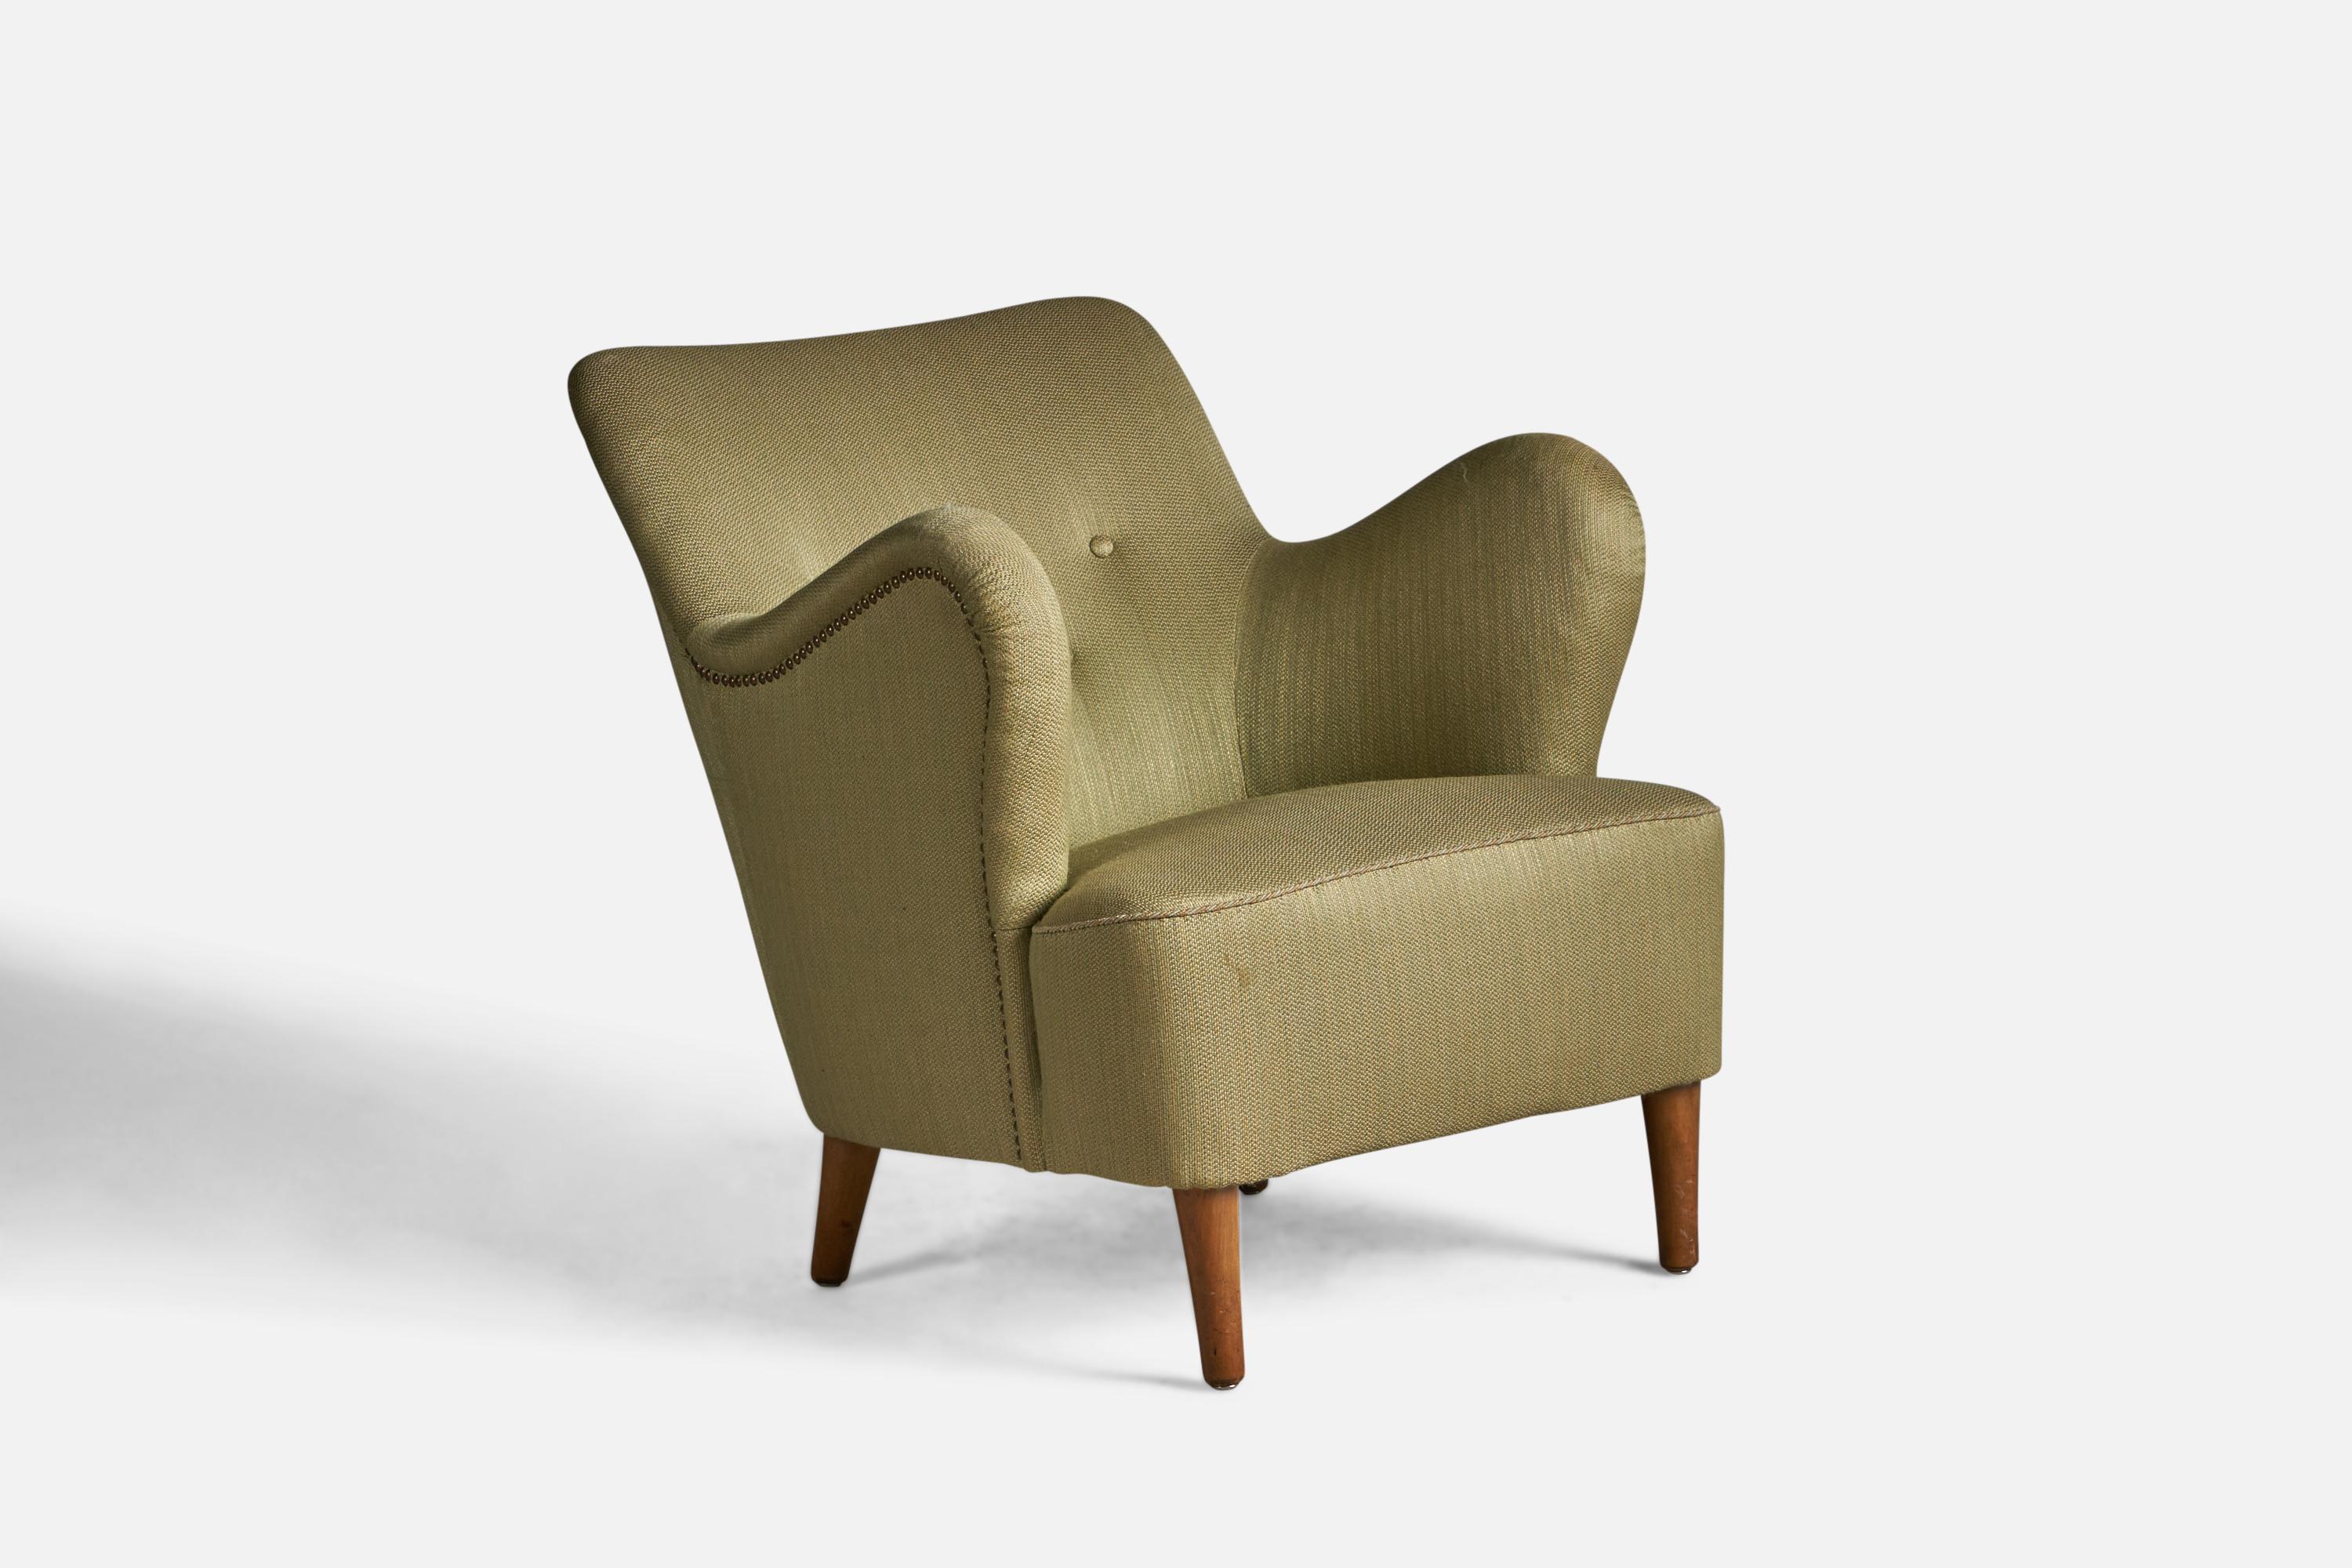 An organic wood and green fabric lounge chair, designed and produced in Denmark, 1940s.

15.5